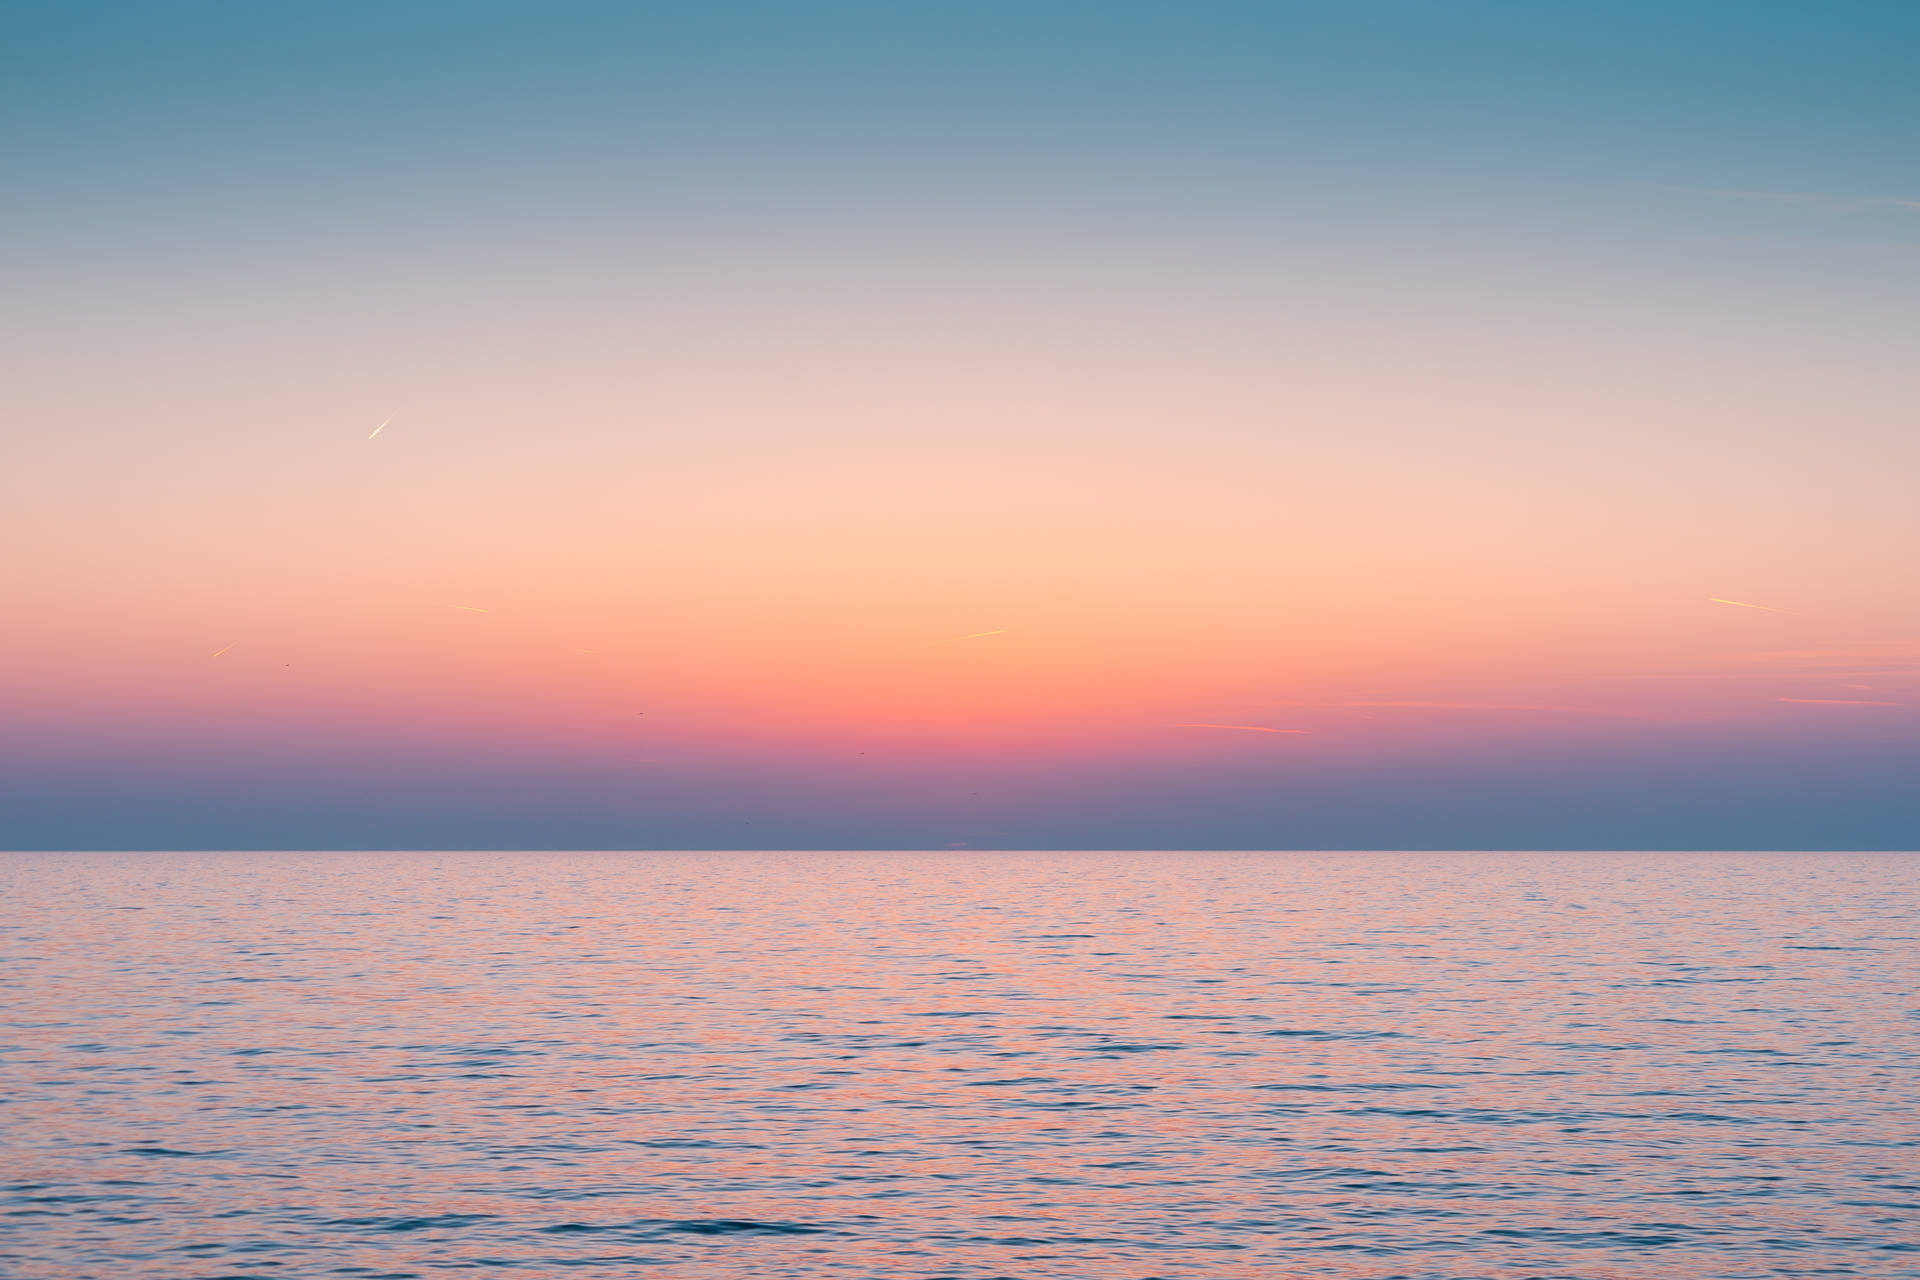 Aesthetic Sky Over Sea Of Water Background